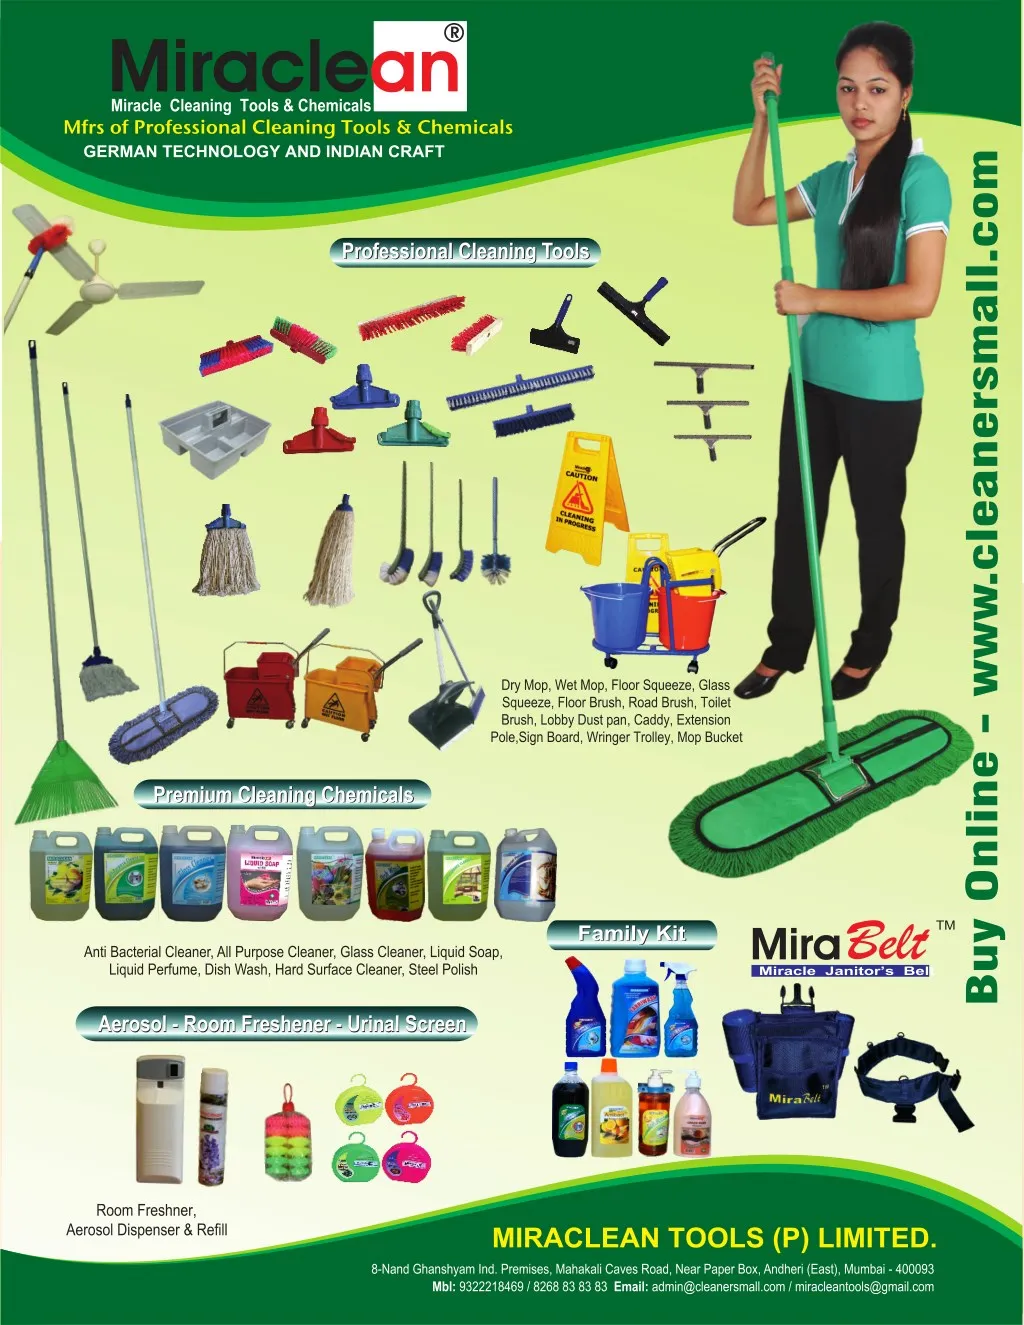 cleaning equipment supplies